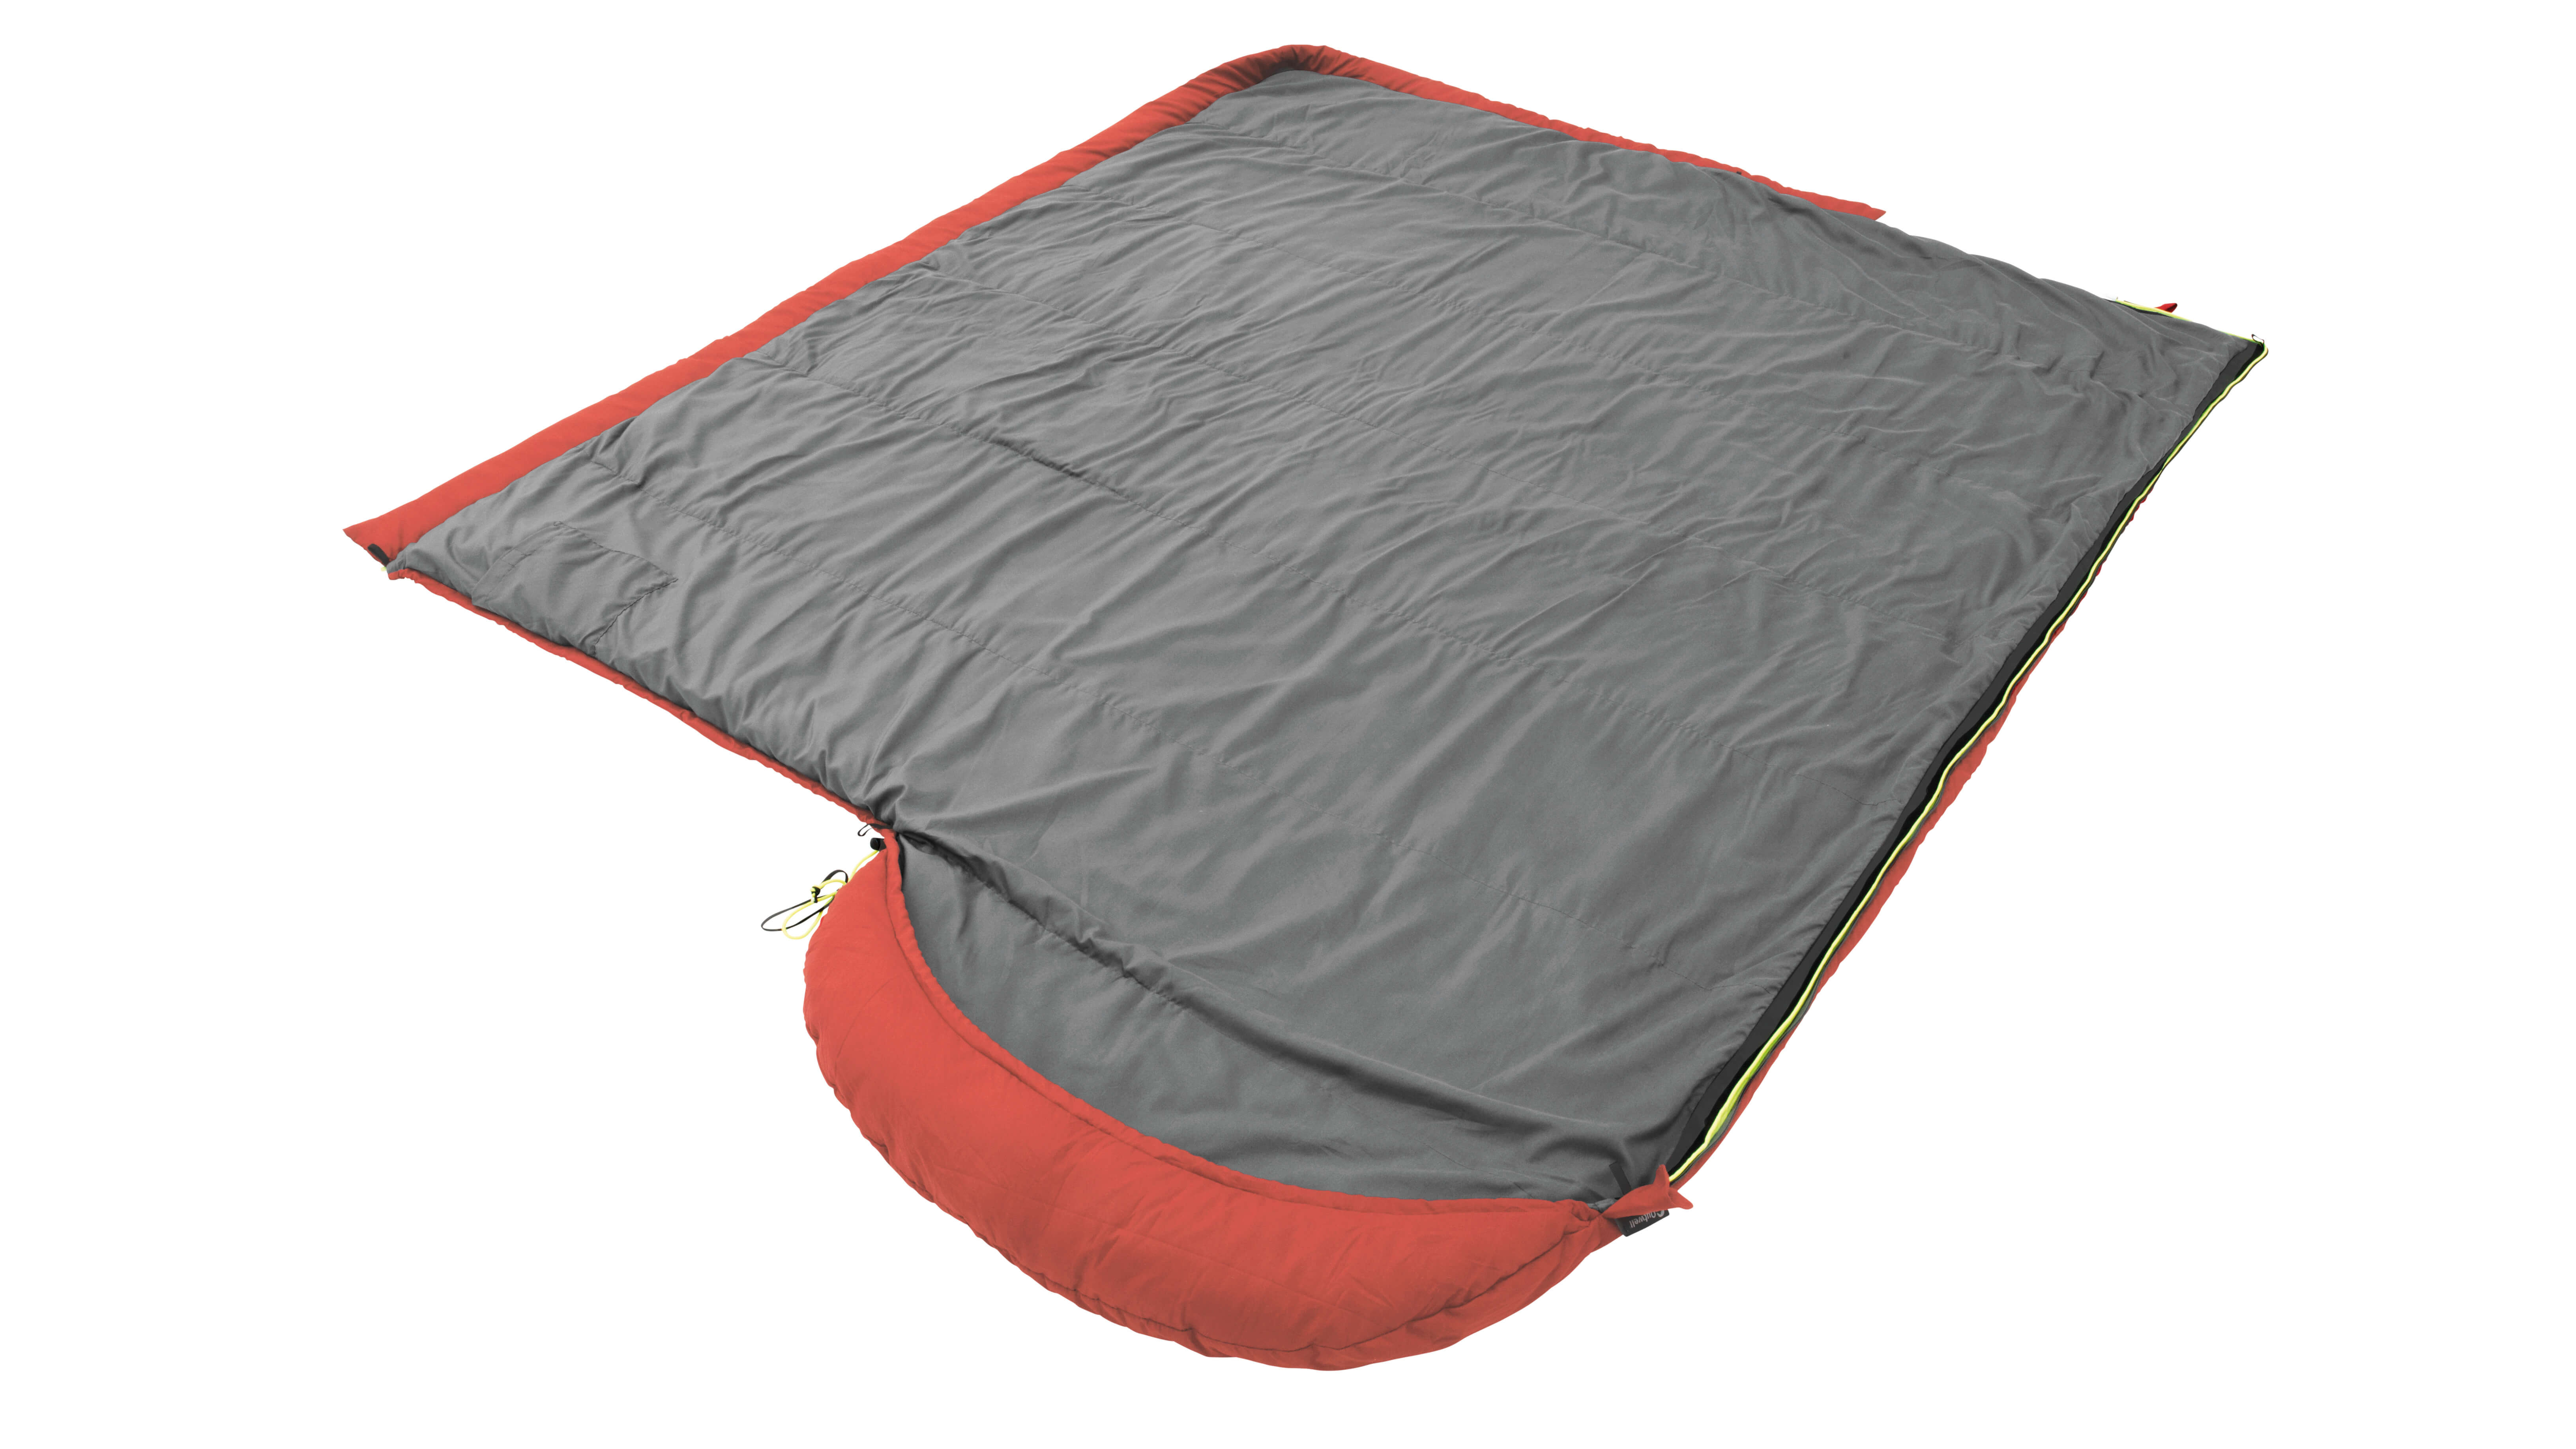 Outwell Schlafsack "Campion", lux rot